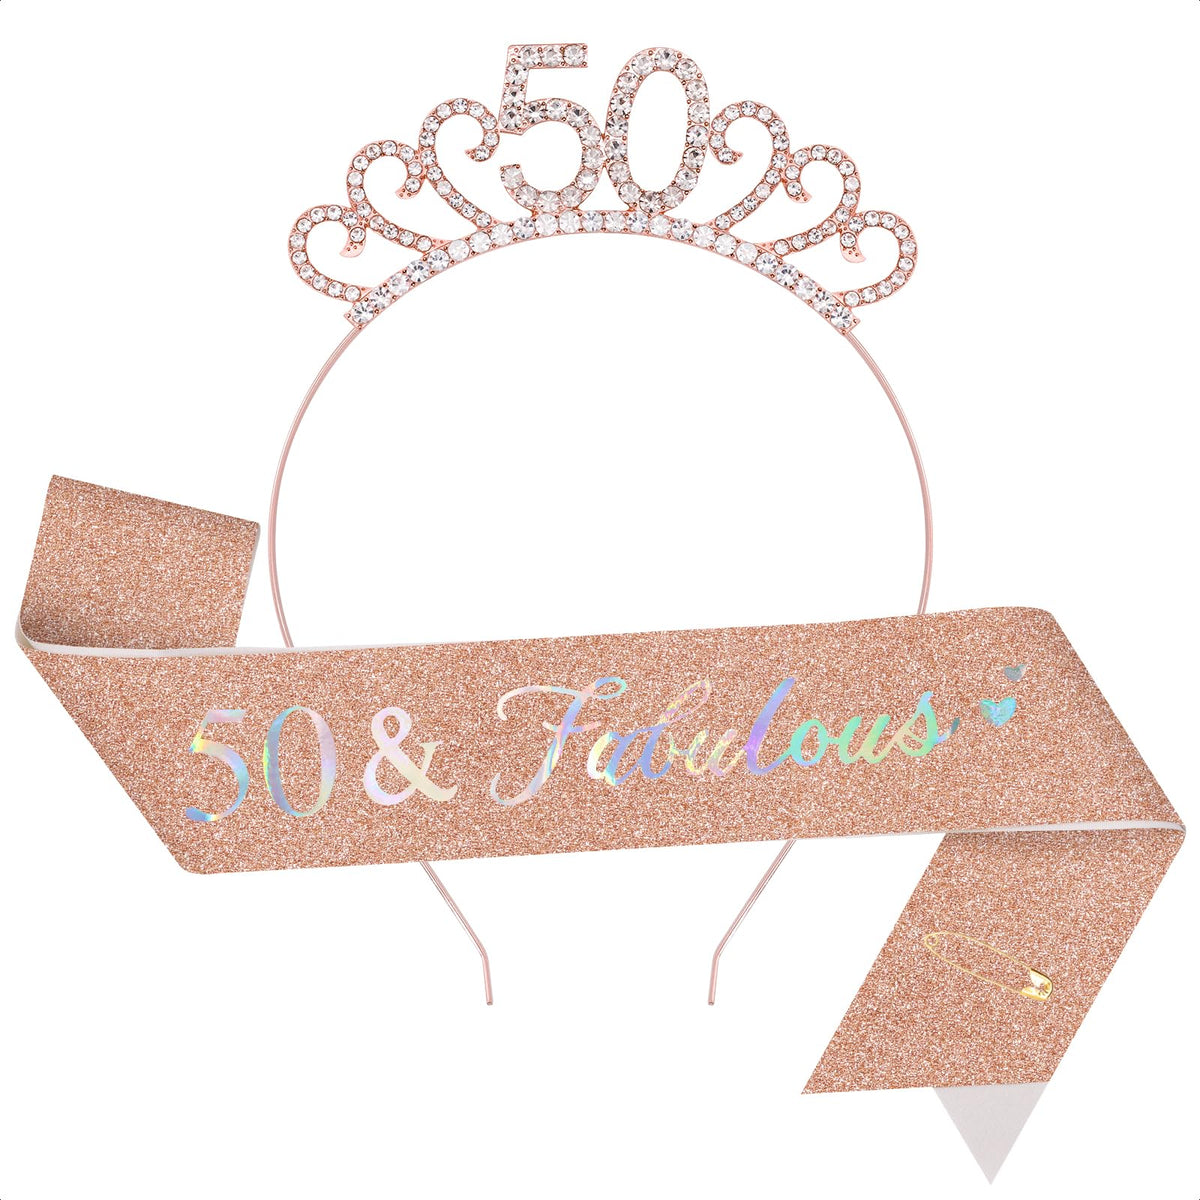 TOPWAYS 50th Birthday Sash and Tiara Set, Rose Gold 50 Glitter Crown Headband & Fabulous Sash Party Supplies 50th Birthday Gifts for Women Girls Her 50th Birthday Decorations (50 Fabulous, Rose Gold)